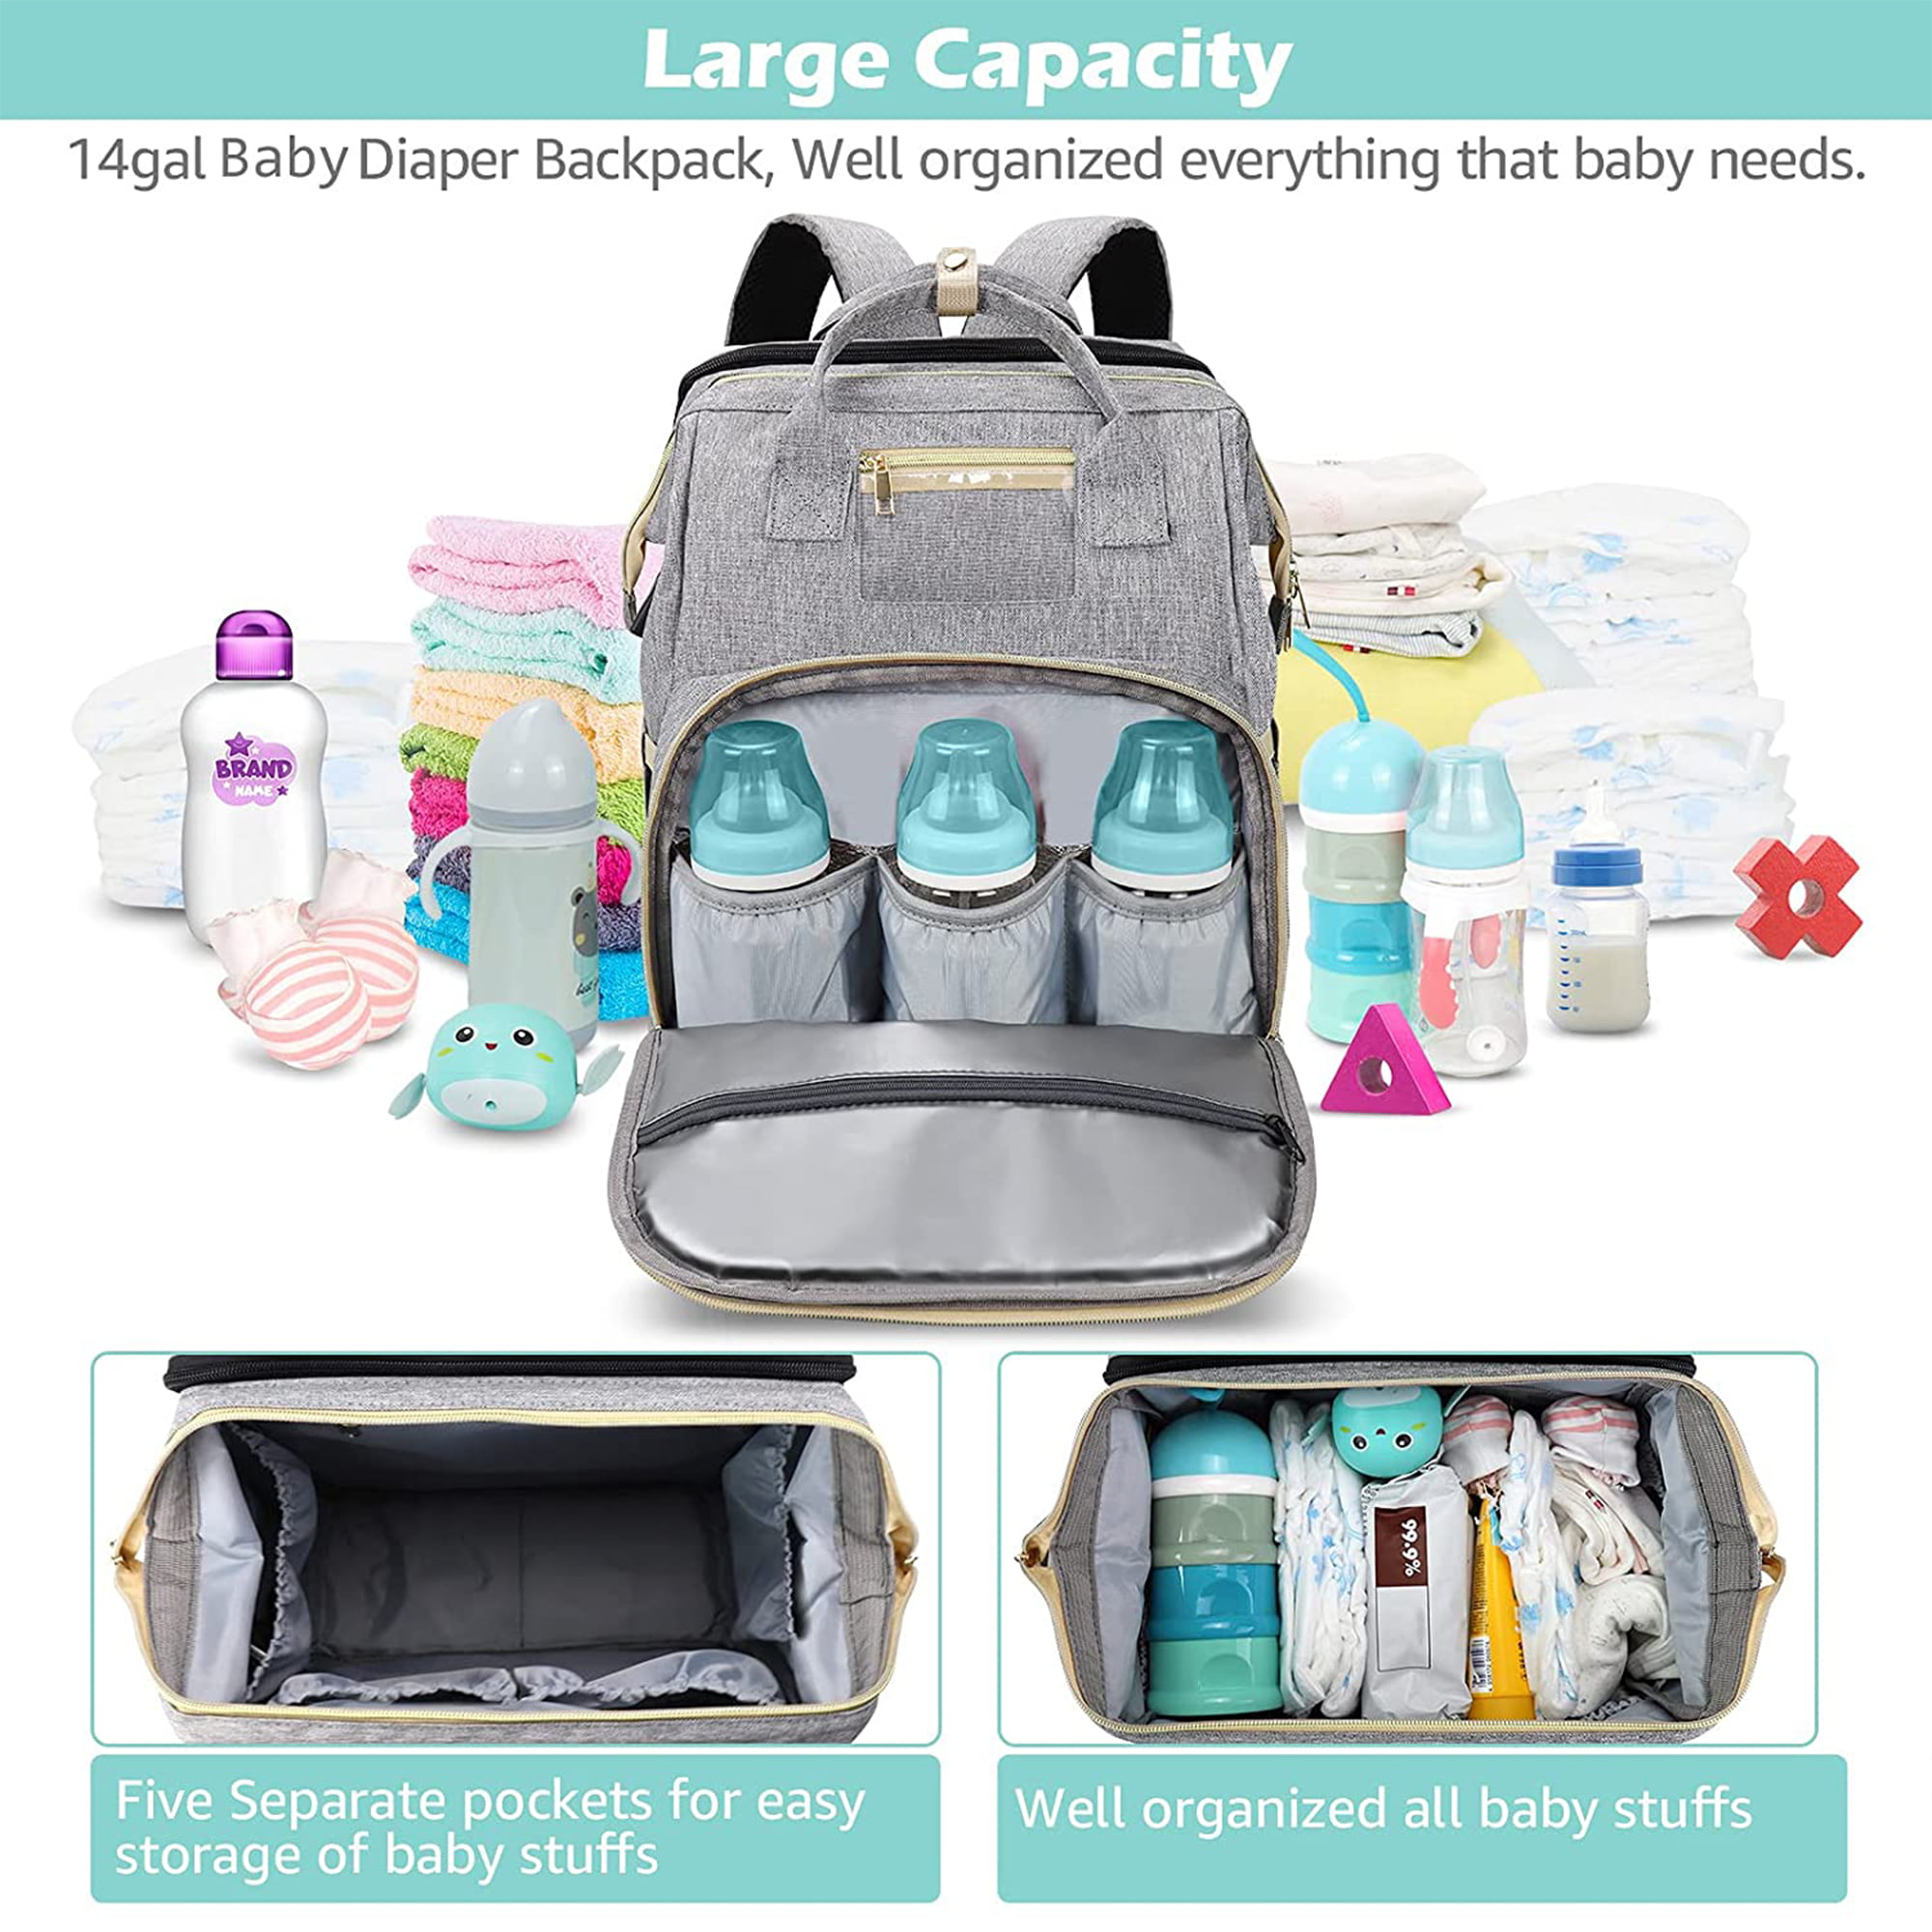 Derjunstar Diaper Bag Backpackbaby Diaper Bags Mothers Day Gifts Multifunctional Travel Diaper Waterproof Backpack for Baby Boy & Girls with Porta